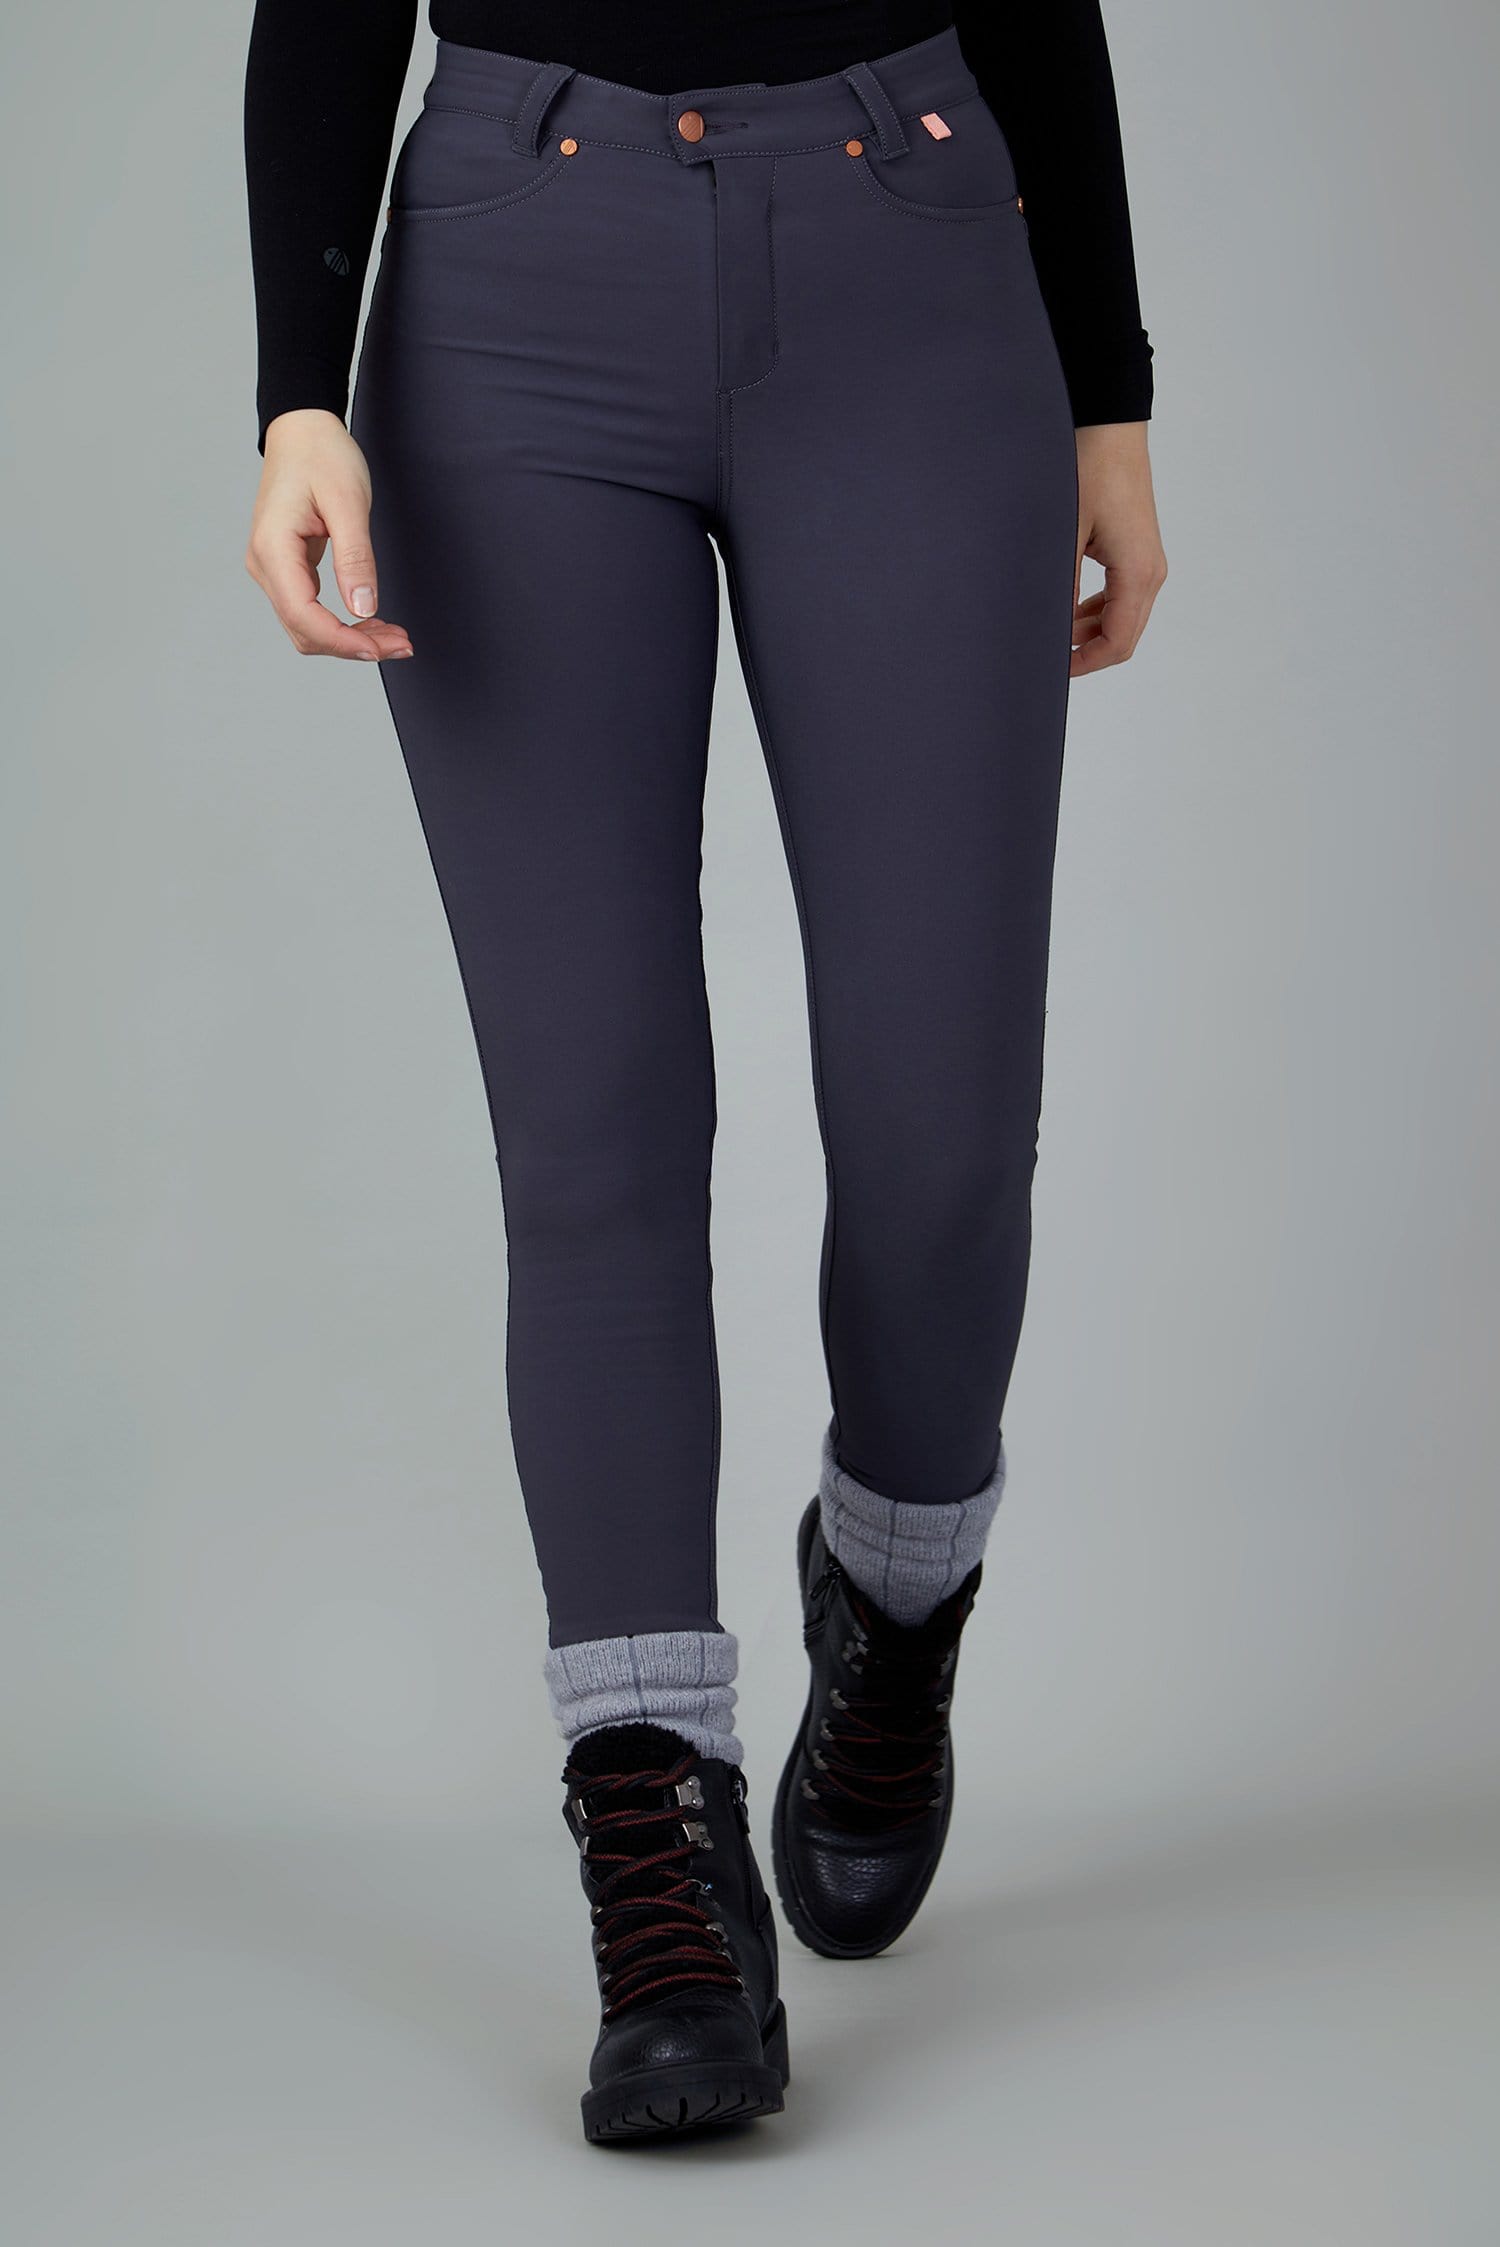 The Aventurite Stretch Skinny Outdoor Trousers - Obsidian - 30xl / Uk12 - Womens - Acai Outdoorwear